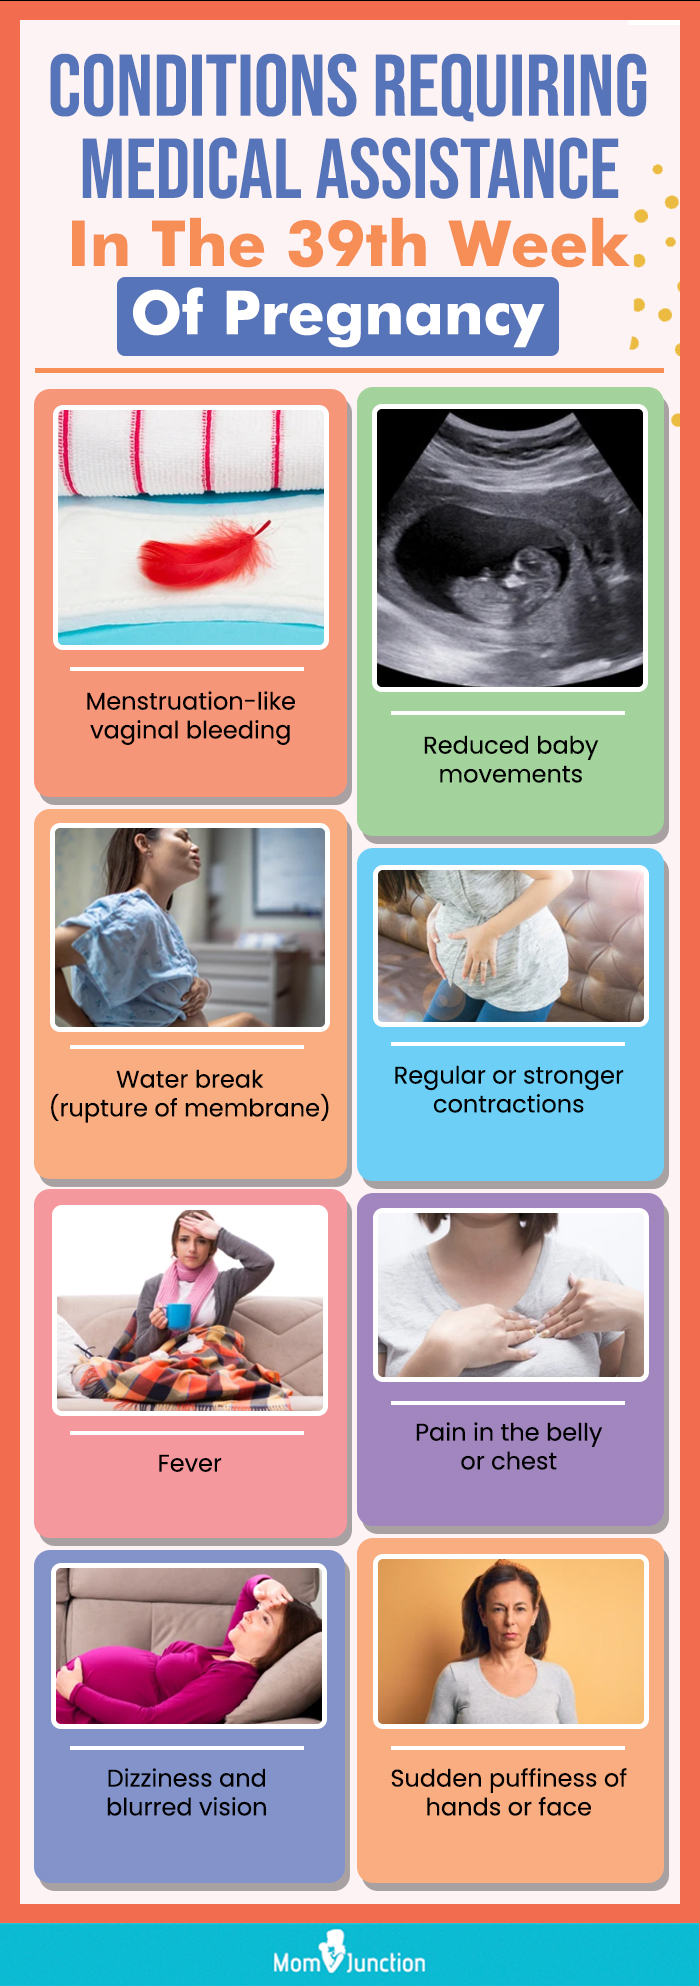  condition requiring medical assistance in the 39th week of pregnancy (infographic)